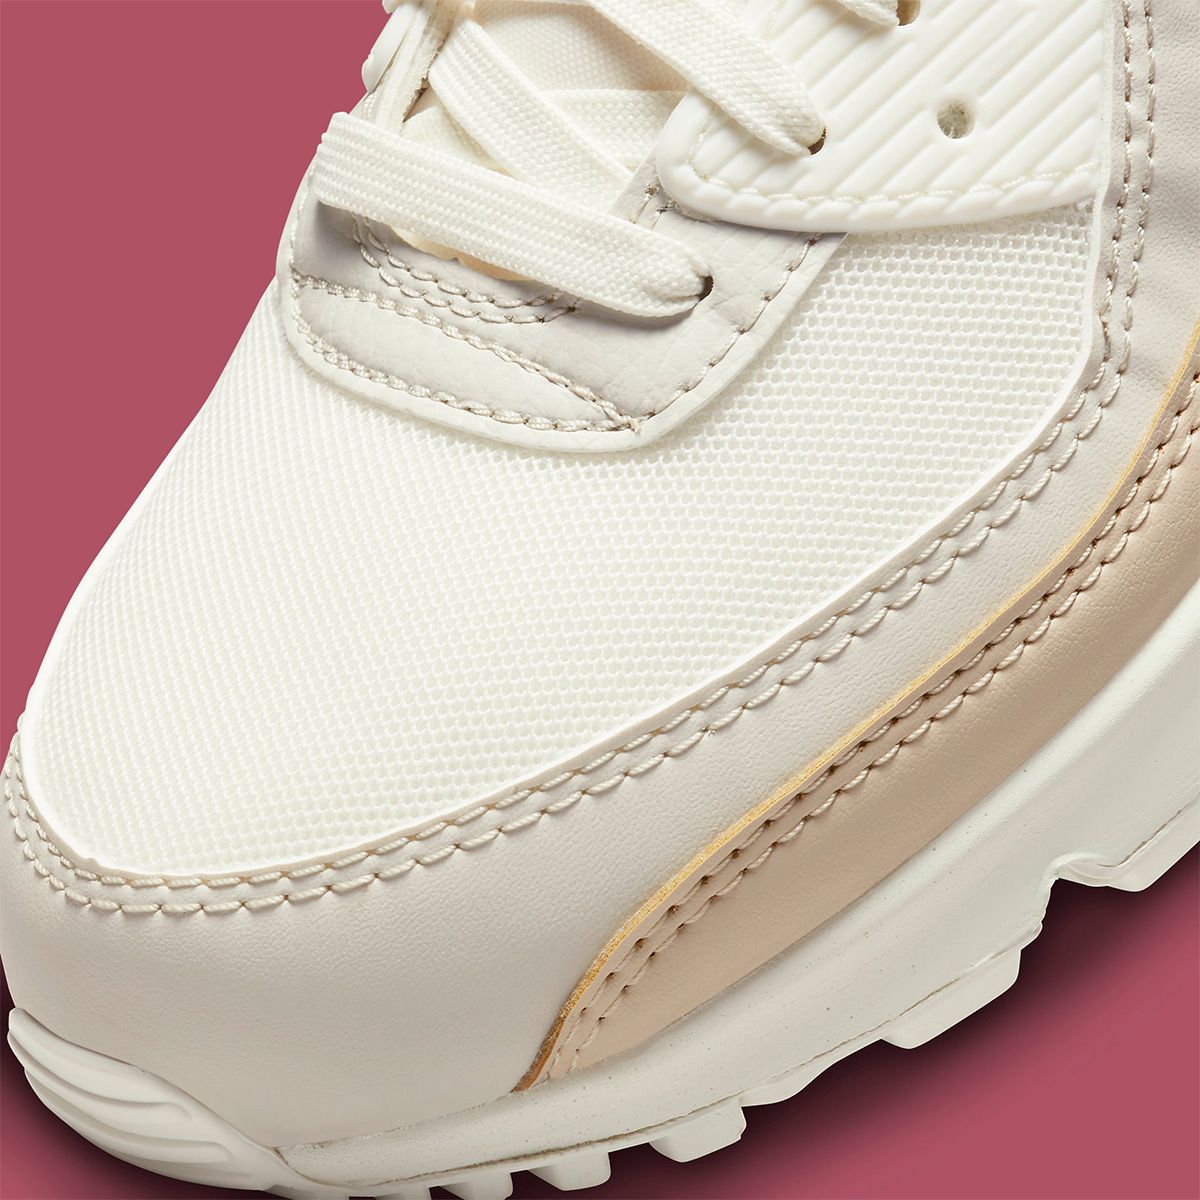 The Nike Air Max 90 Surfaces in Sail and Beige | HOUSE OF HEAT